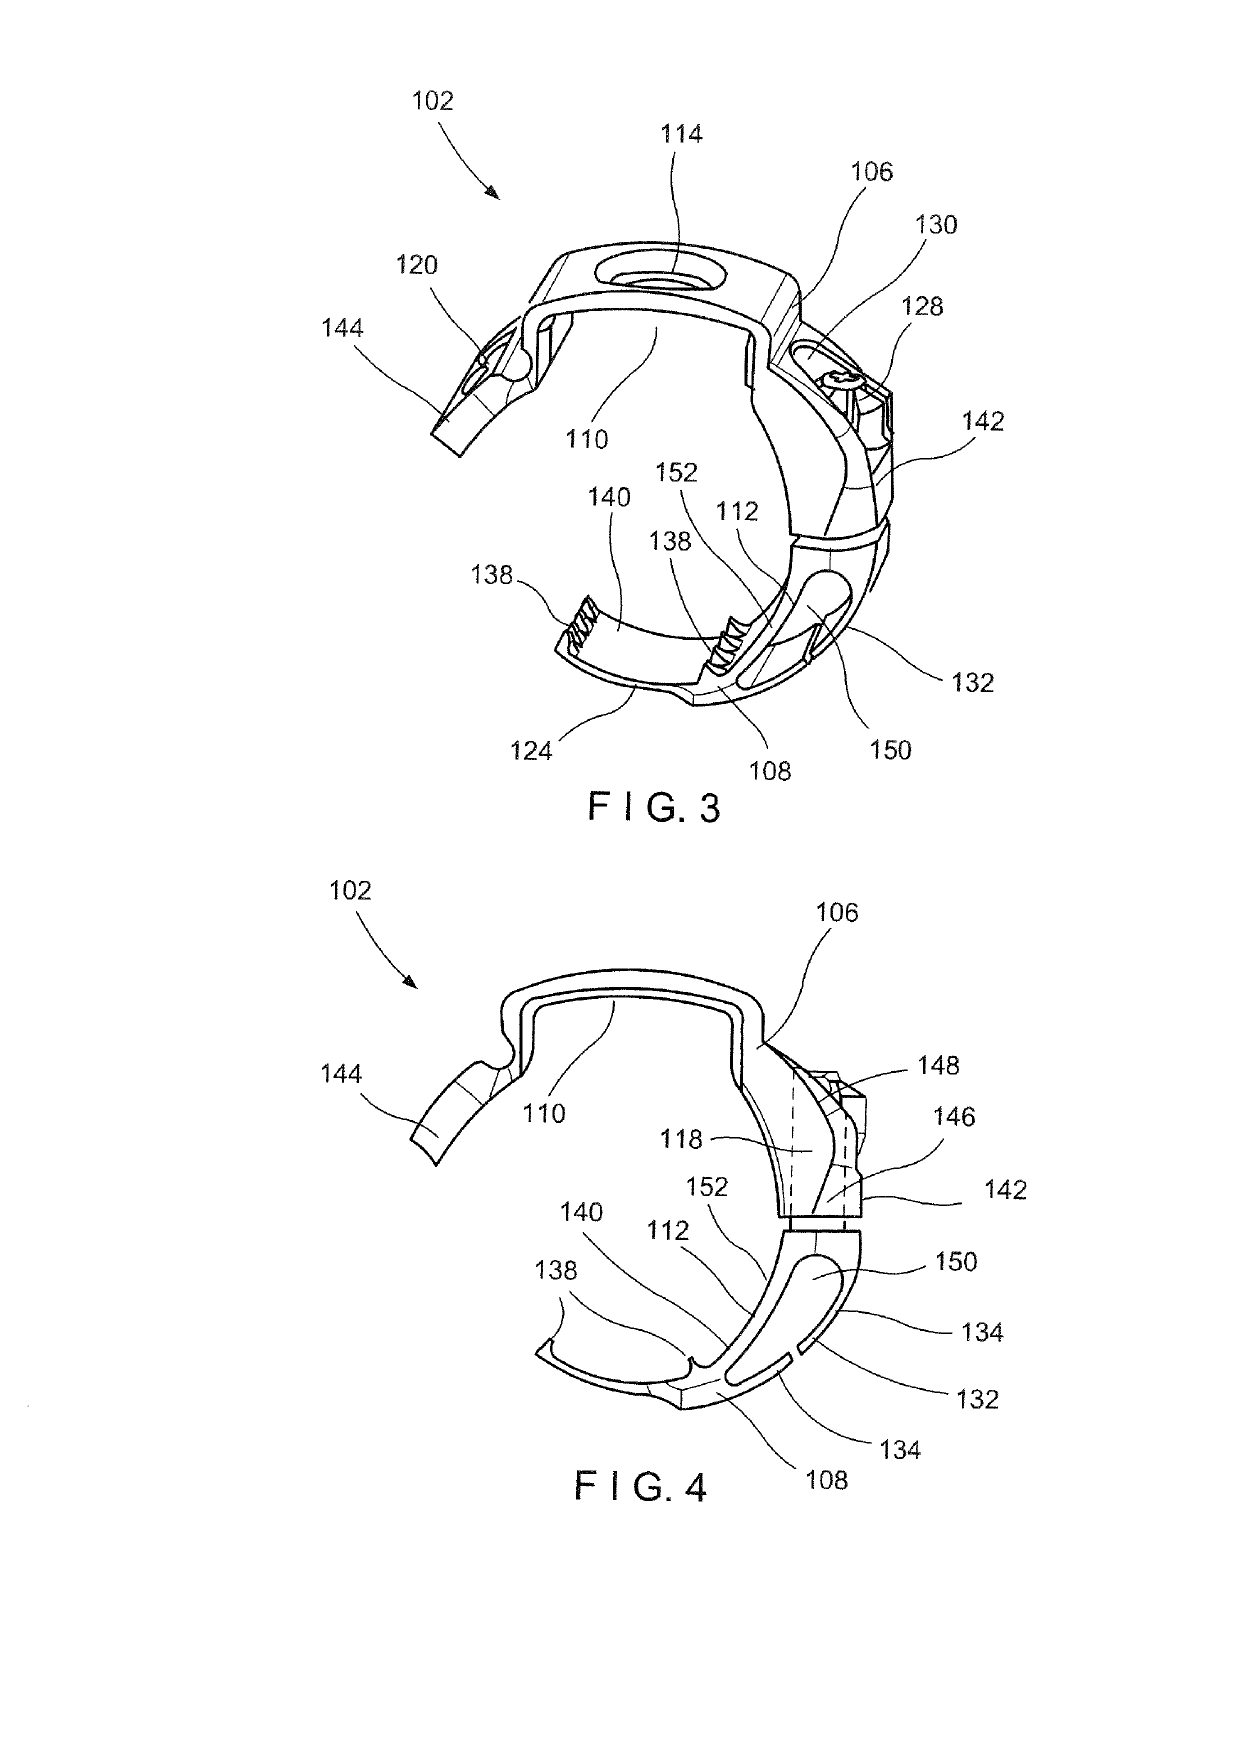 Bone Fracture Fixation Clamp with Bone Remodeling Adaptability